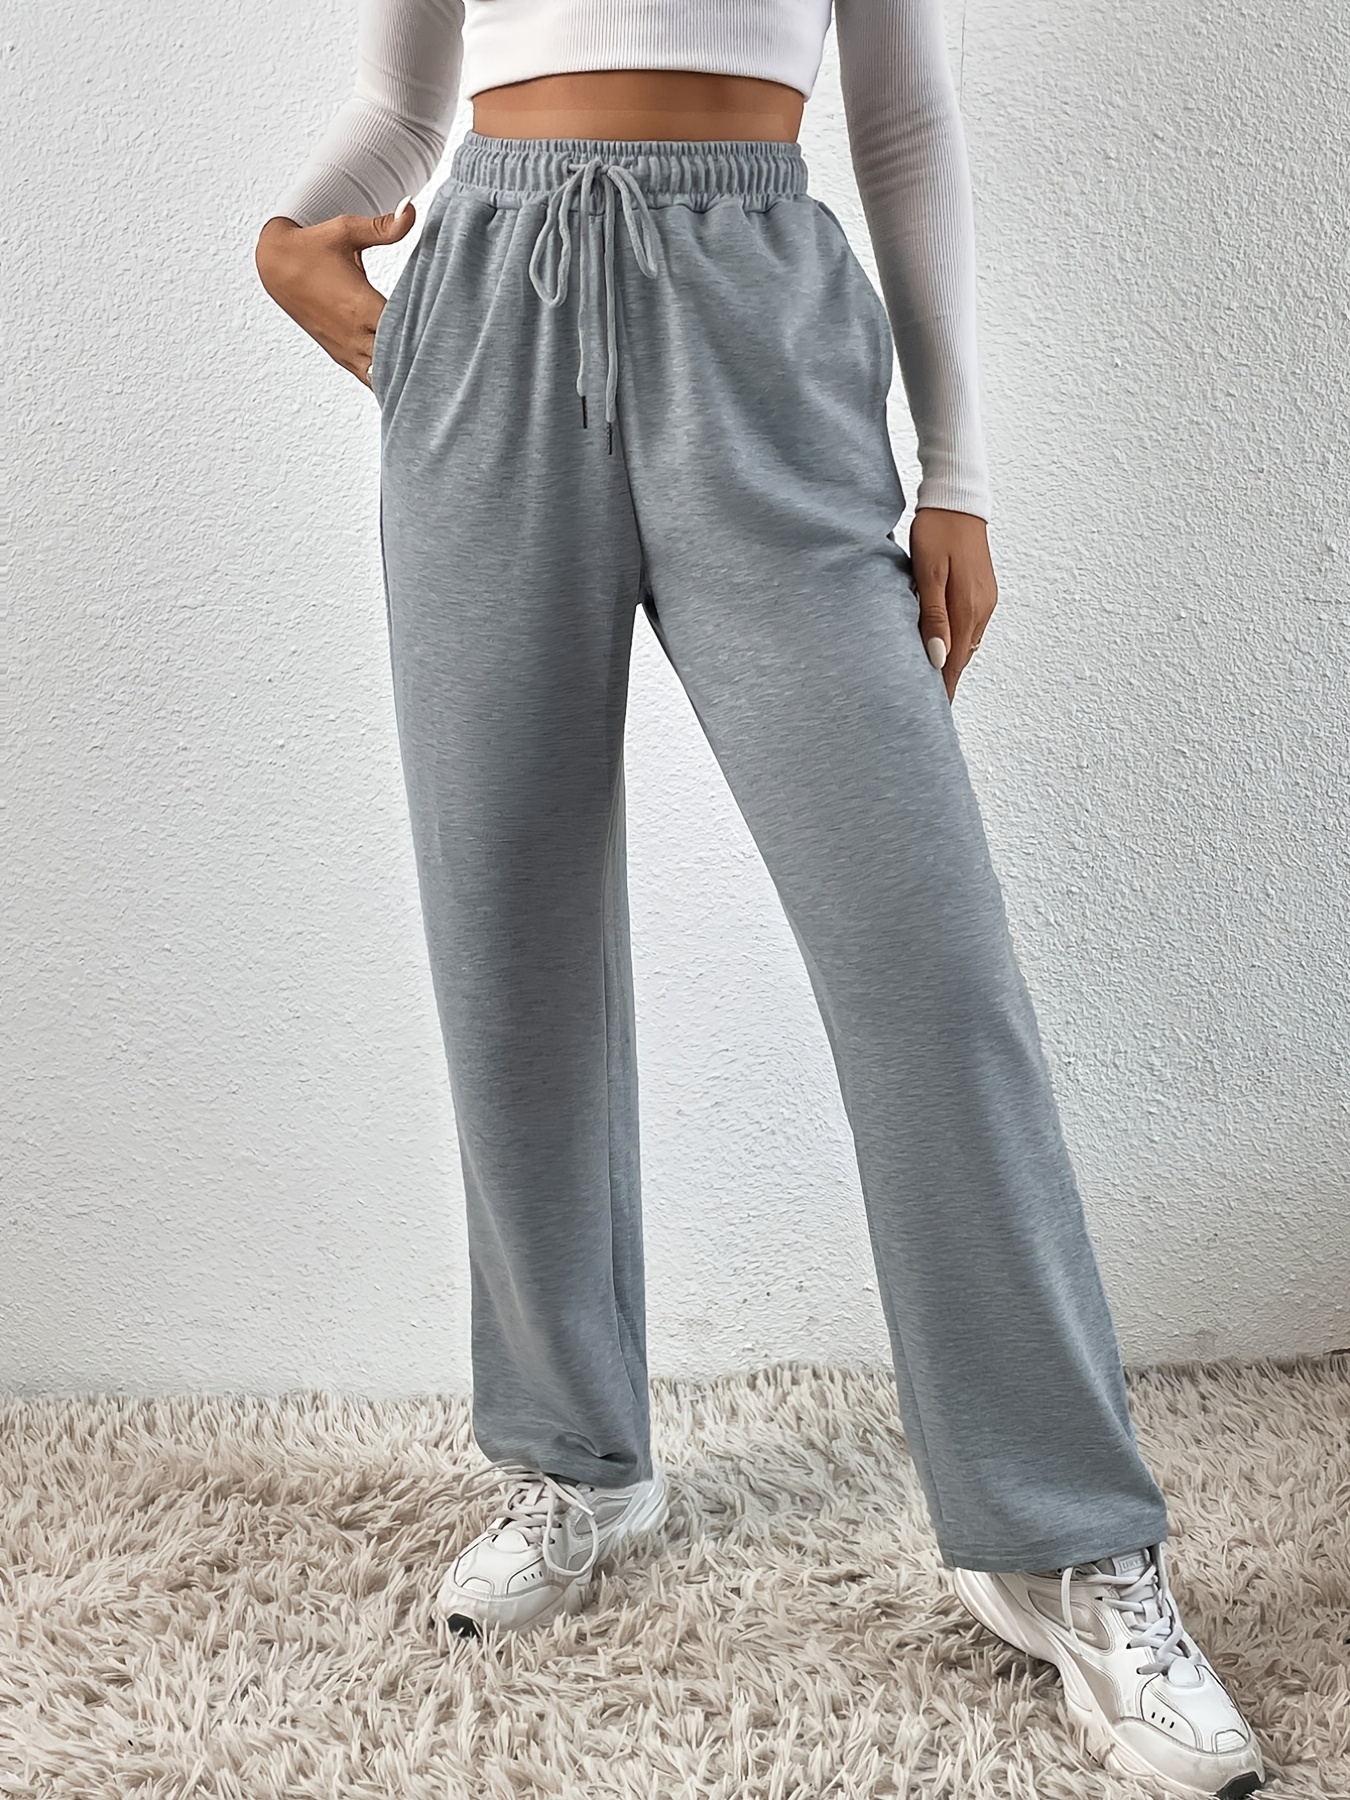 Drawstring Elastic Sweatpants, Solid High Waist Sweatpants With Pocket,  Casual Every Day Pants, Women's Clothing